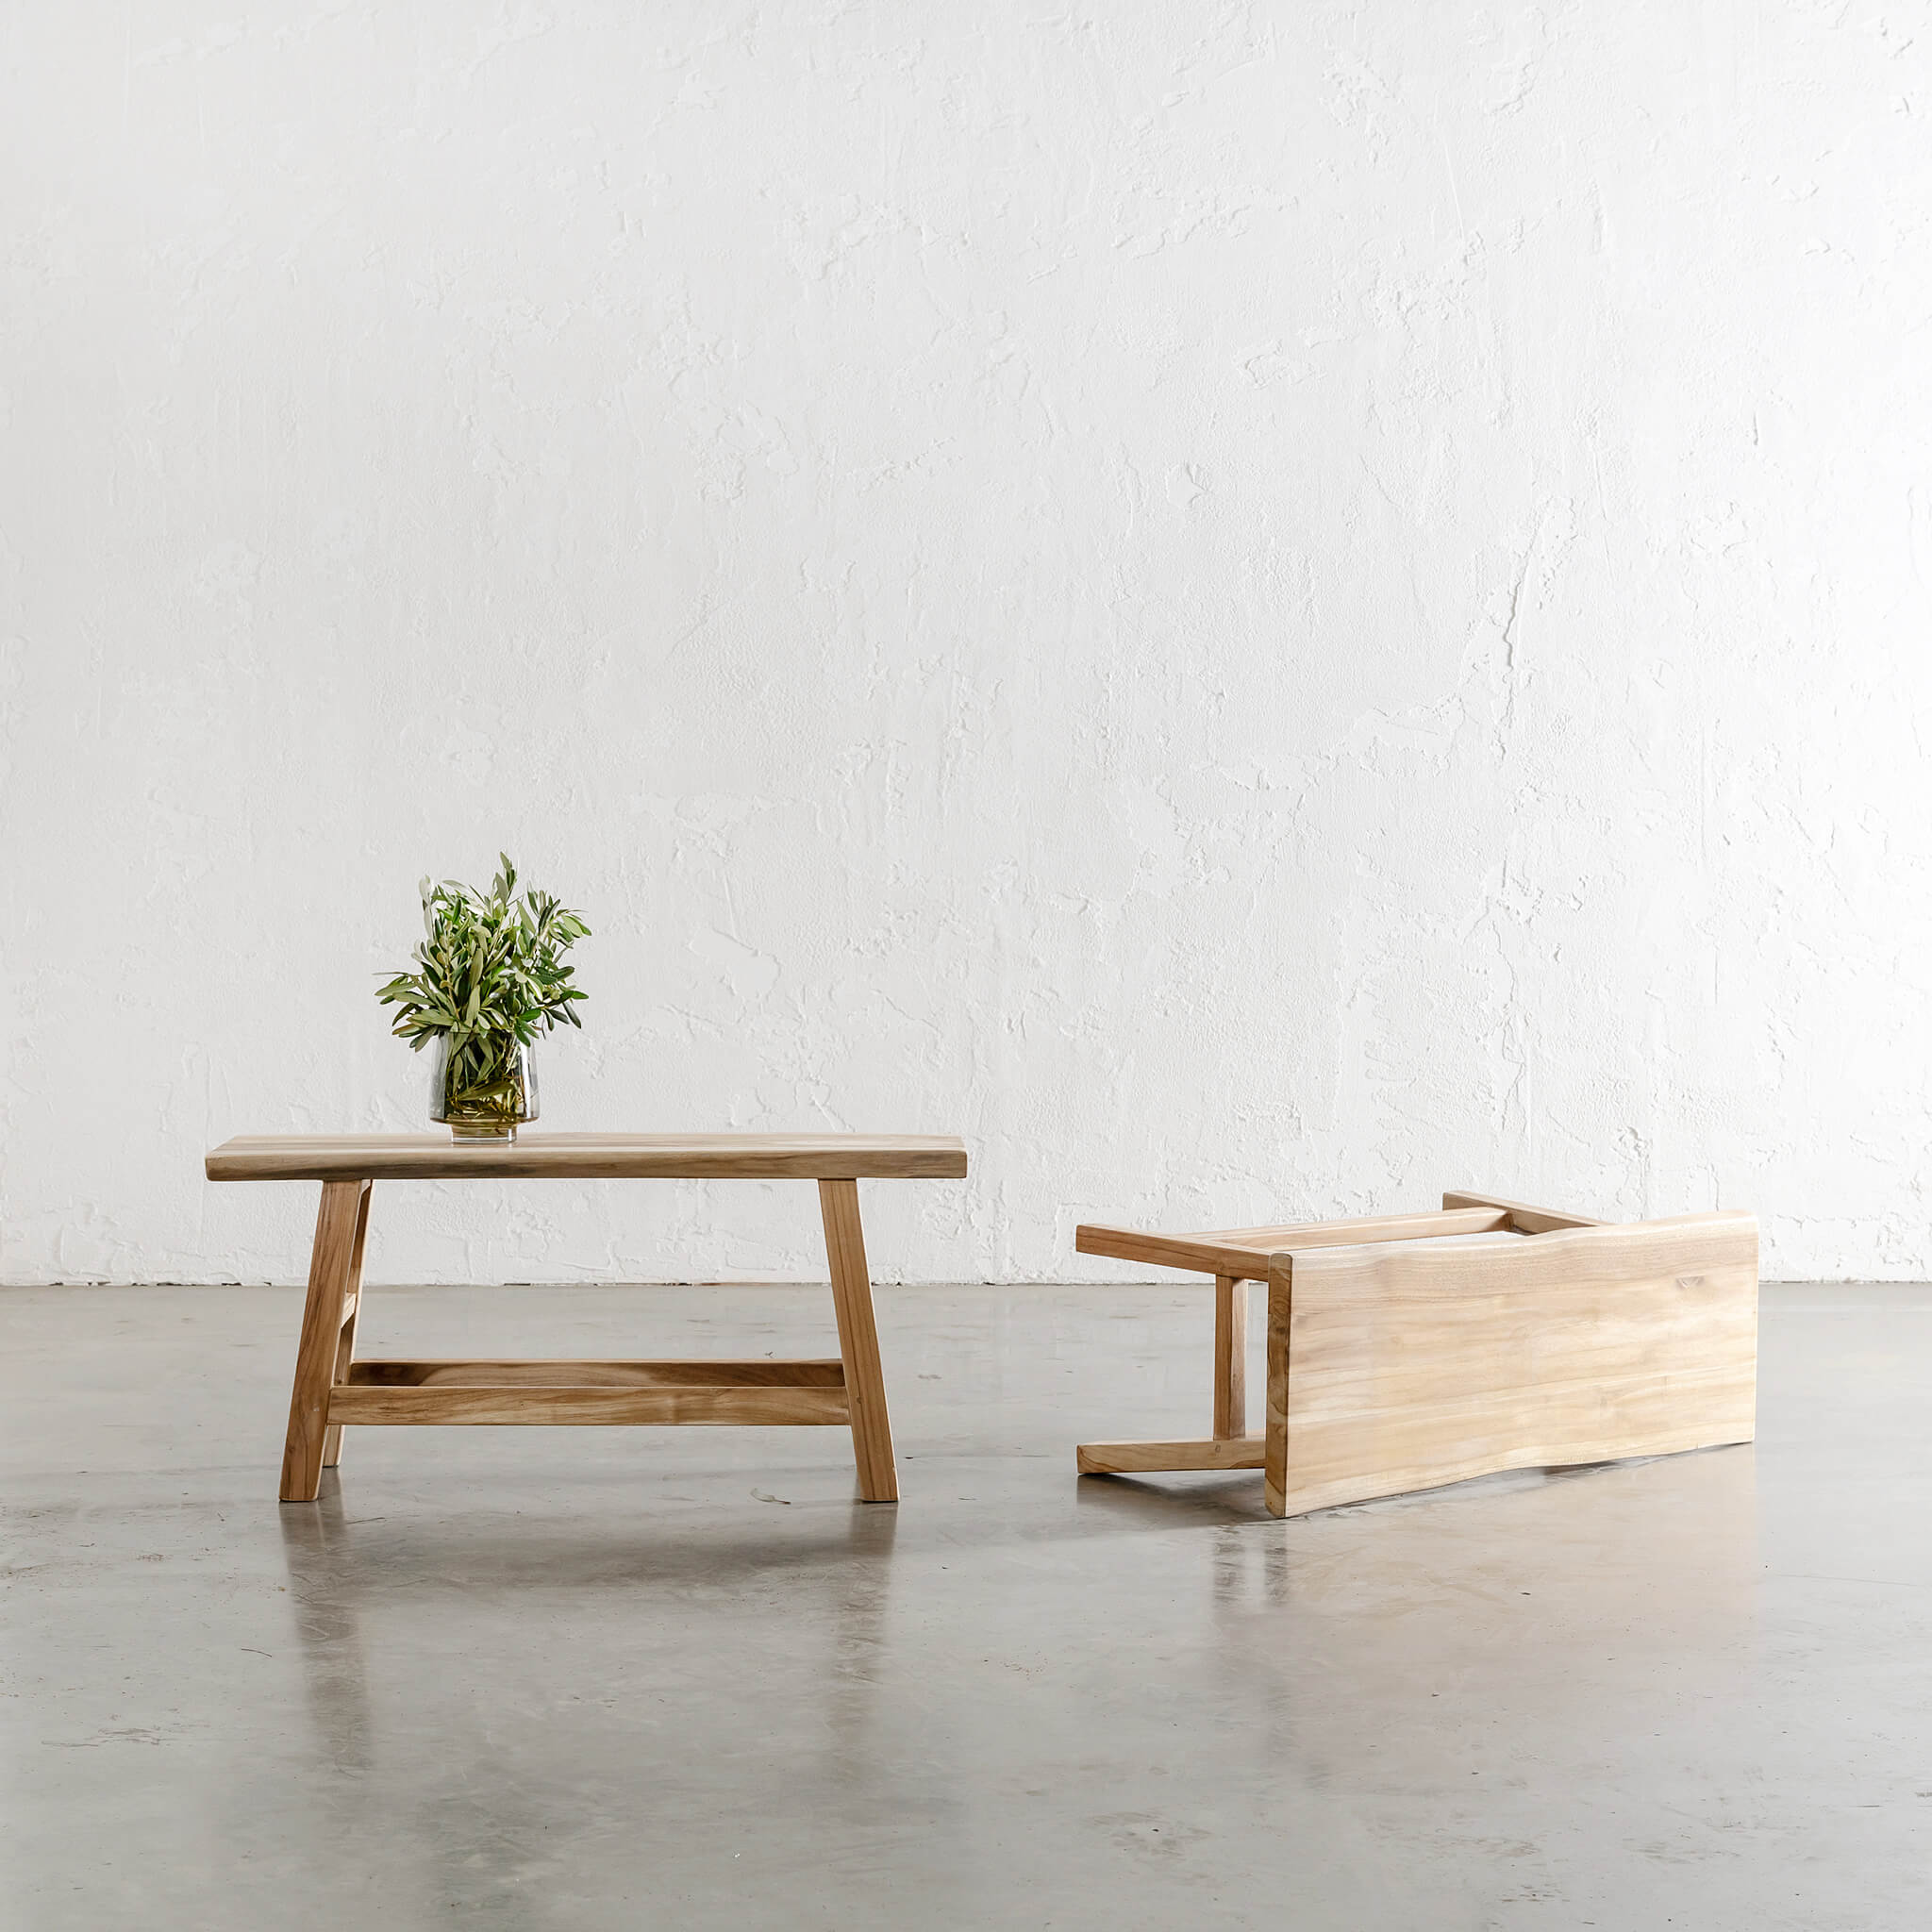 WOODEN CHAIRS  |  TEAK CHAIRS + BENCH SEATING